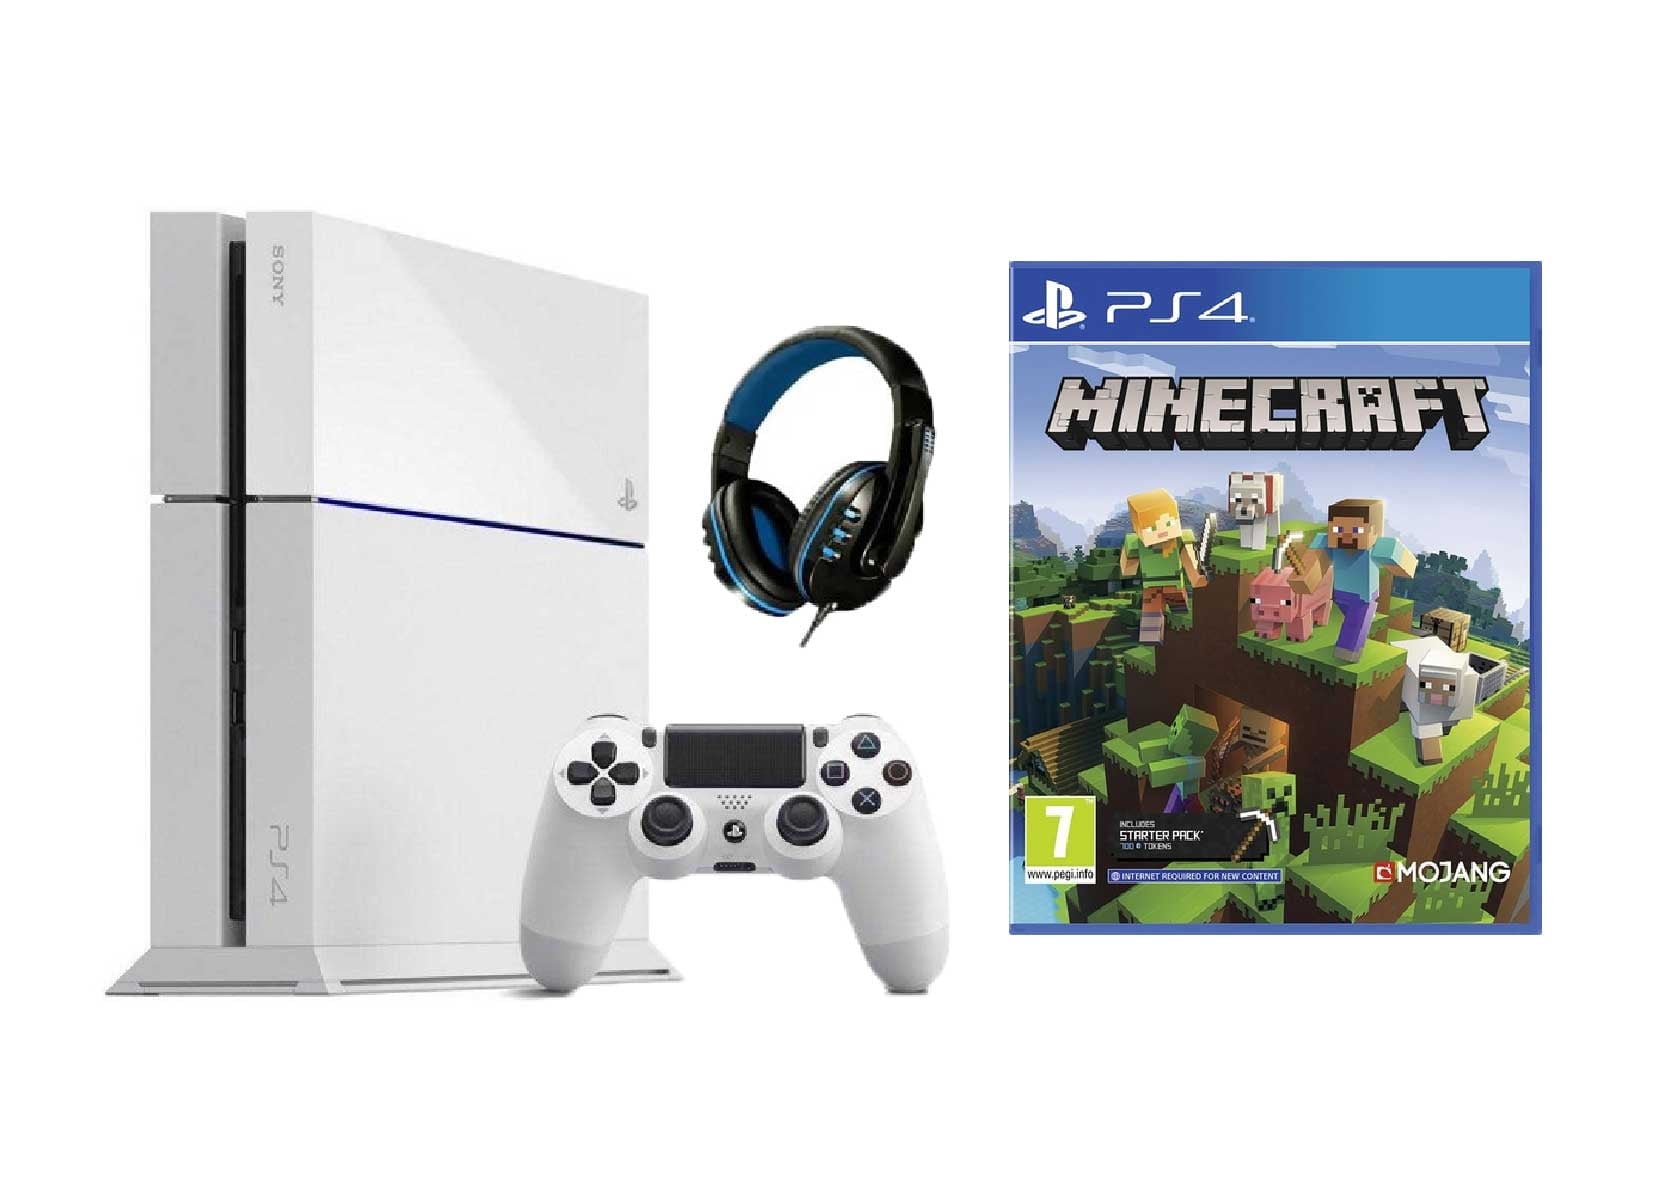 PS4 - Minecraft (Playstation 4 Edition) - Console Game